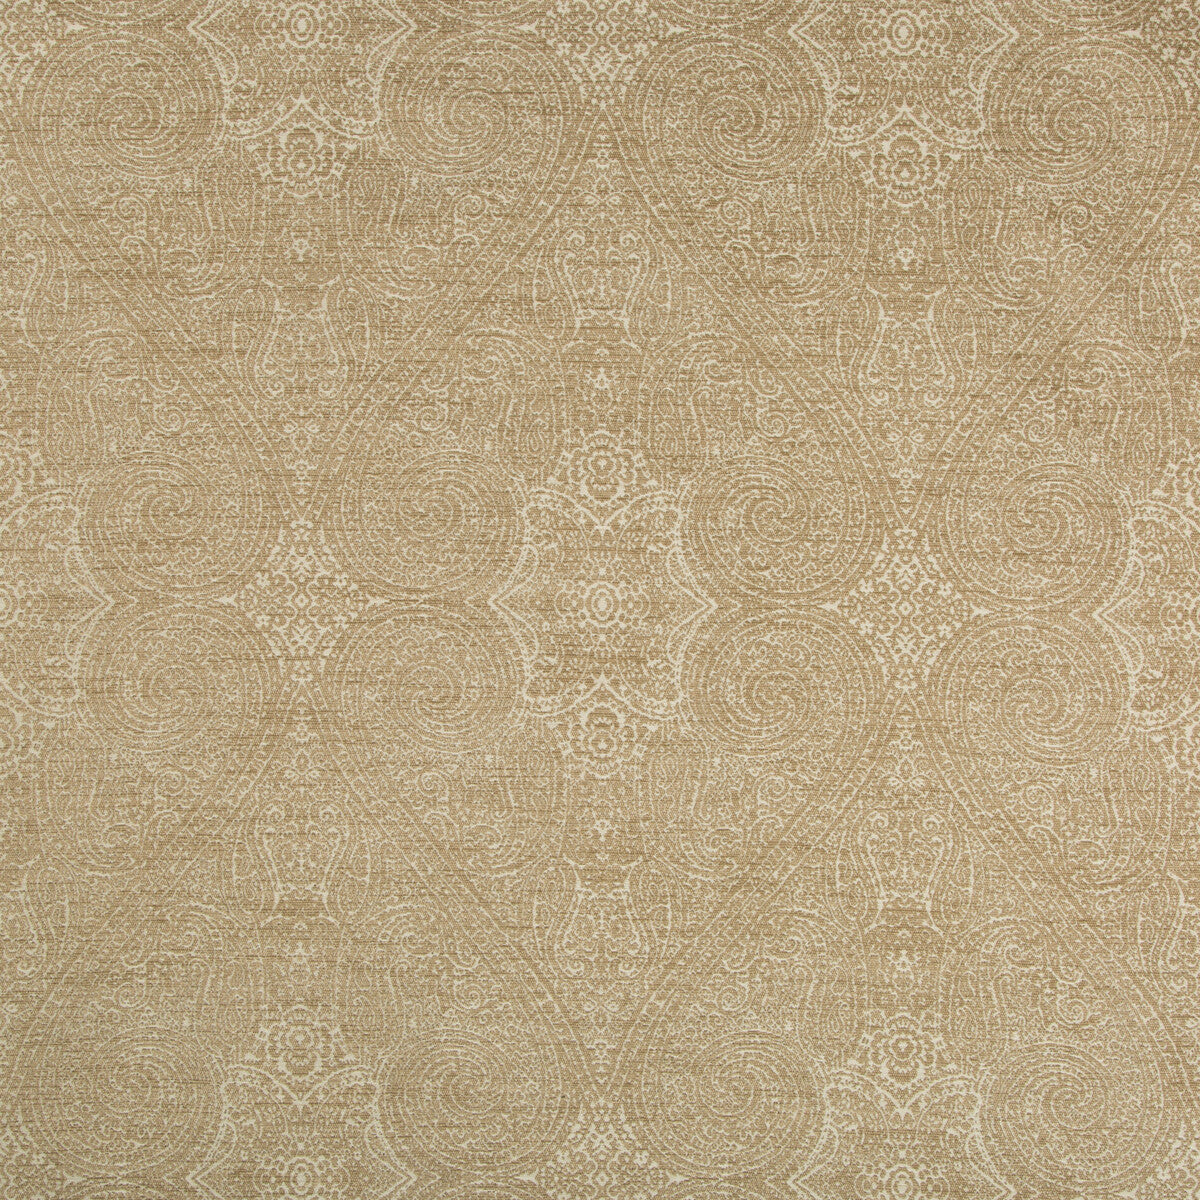 Kravet Contract fabric in 35131-606 color - pattern 35131.606.0 - by Kravet Contract in the Incase Crypton Gis collection